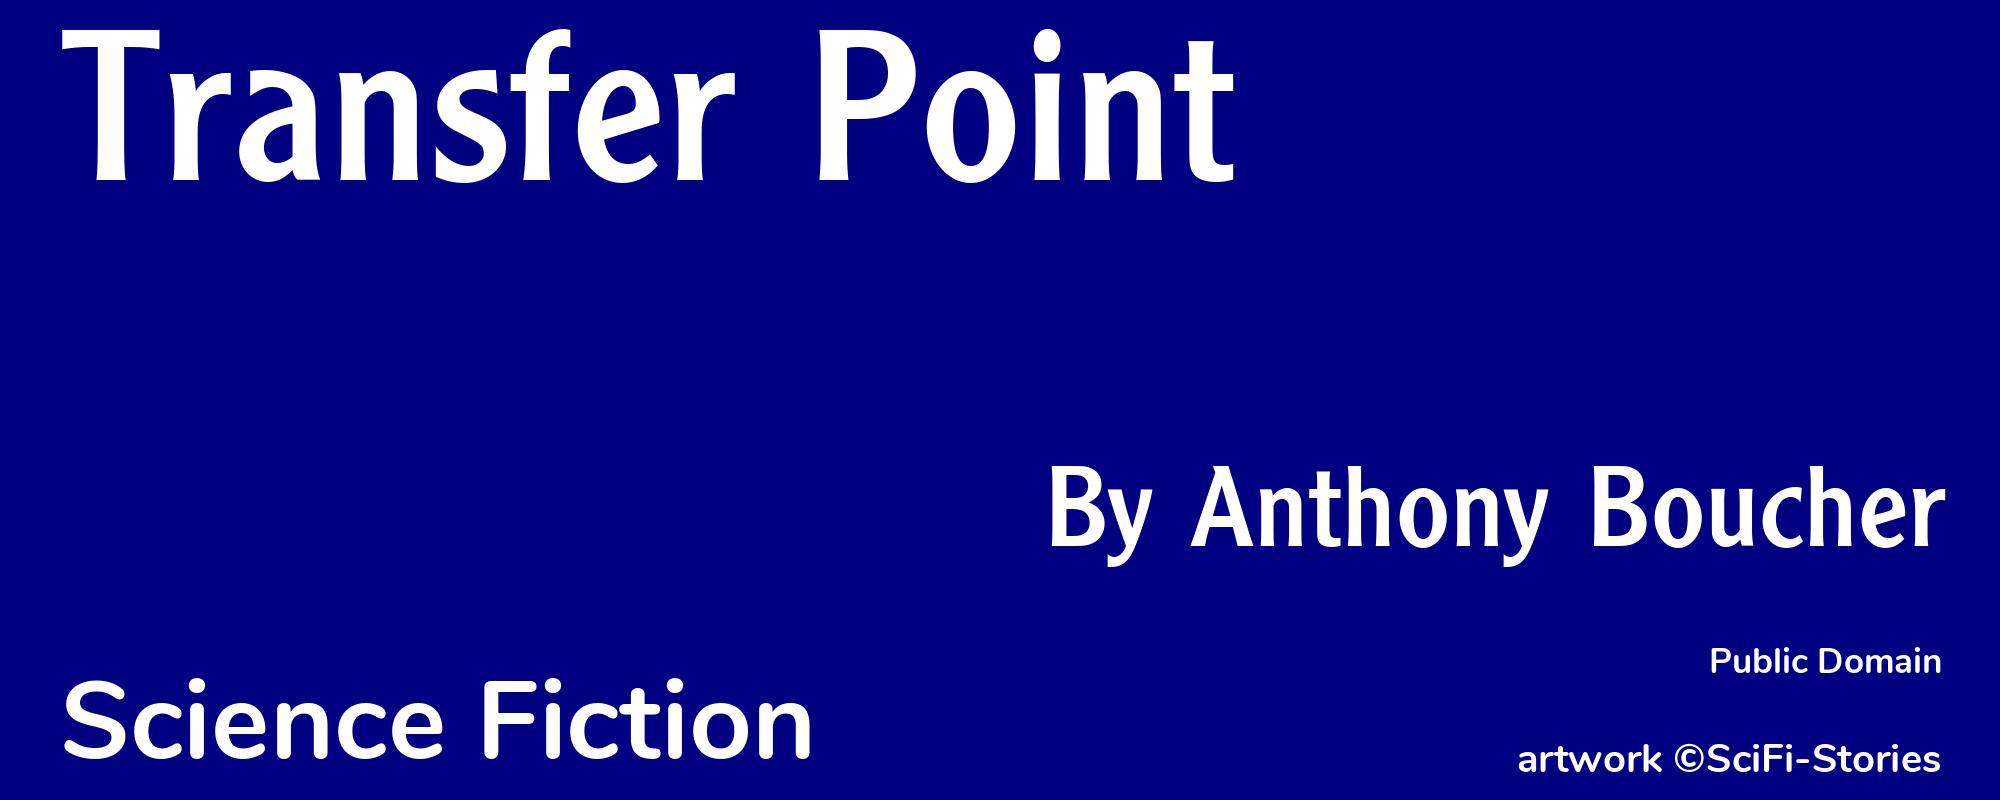 Transfer Point - Cover